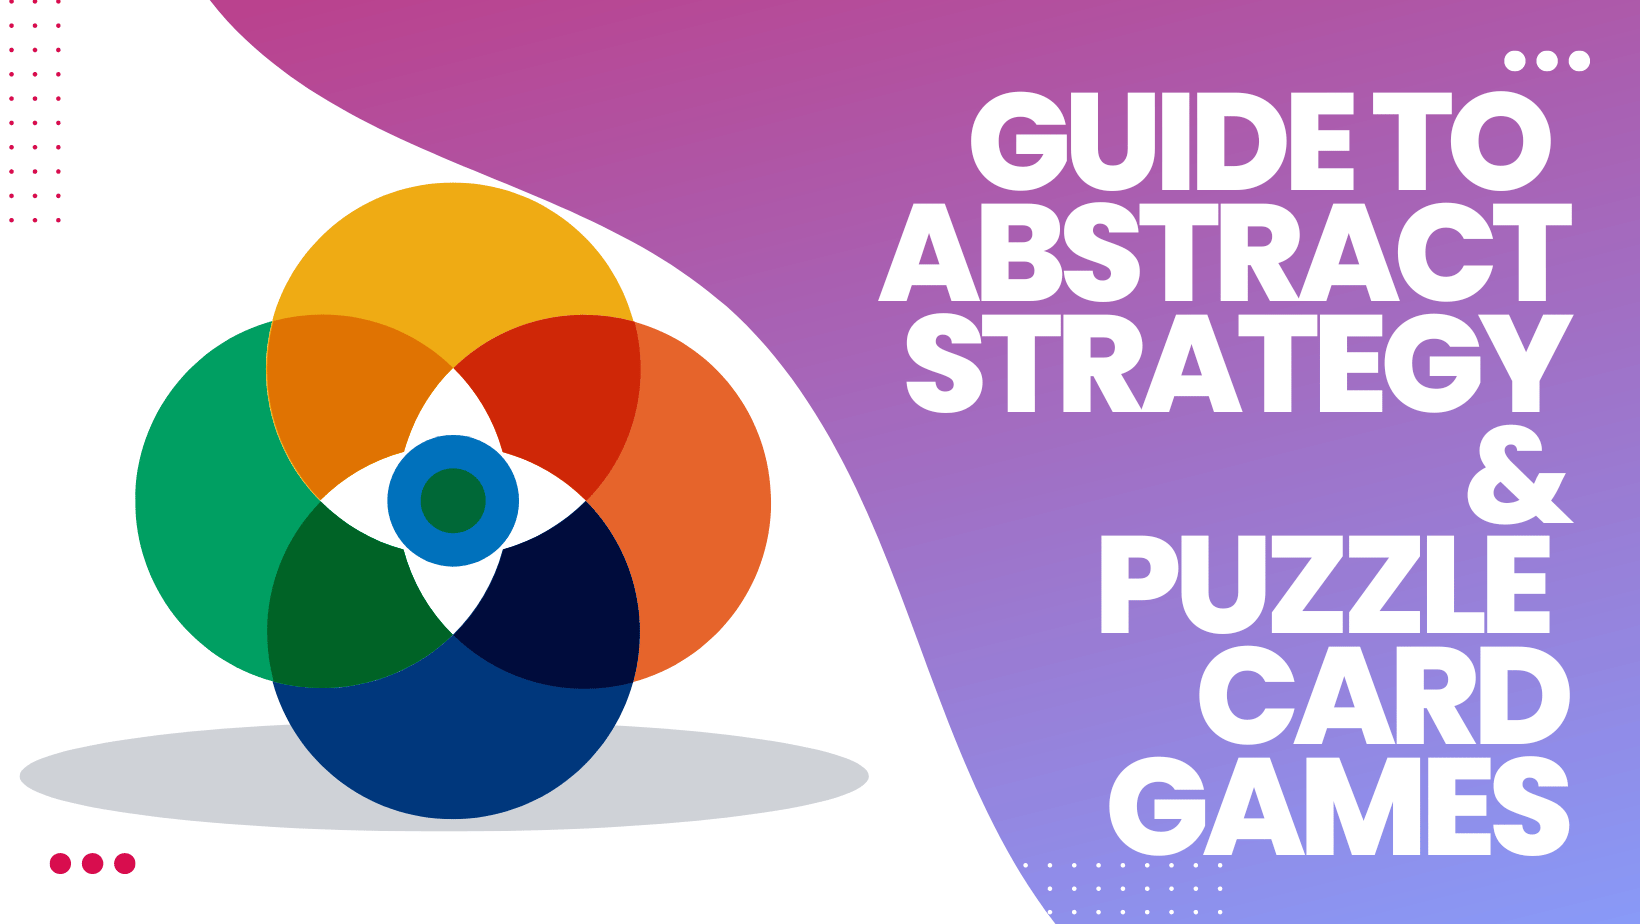 Guide to Abstract Strategy and Puzzle Card Games